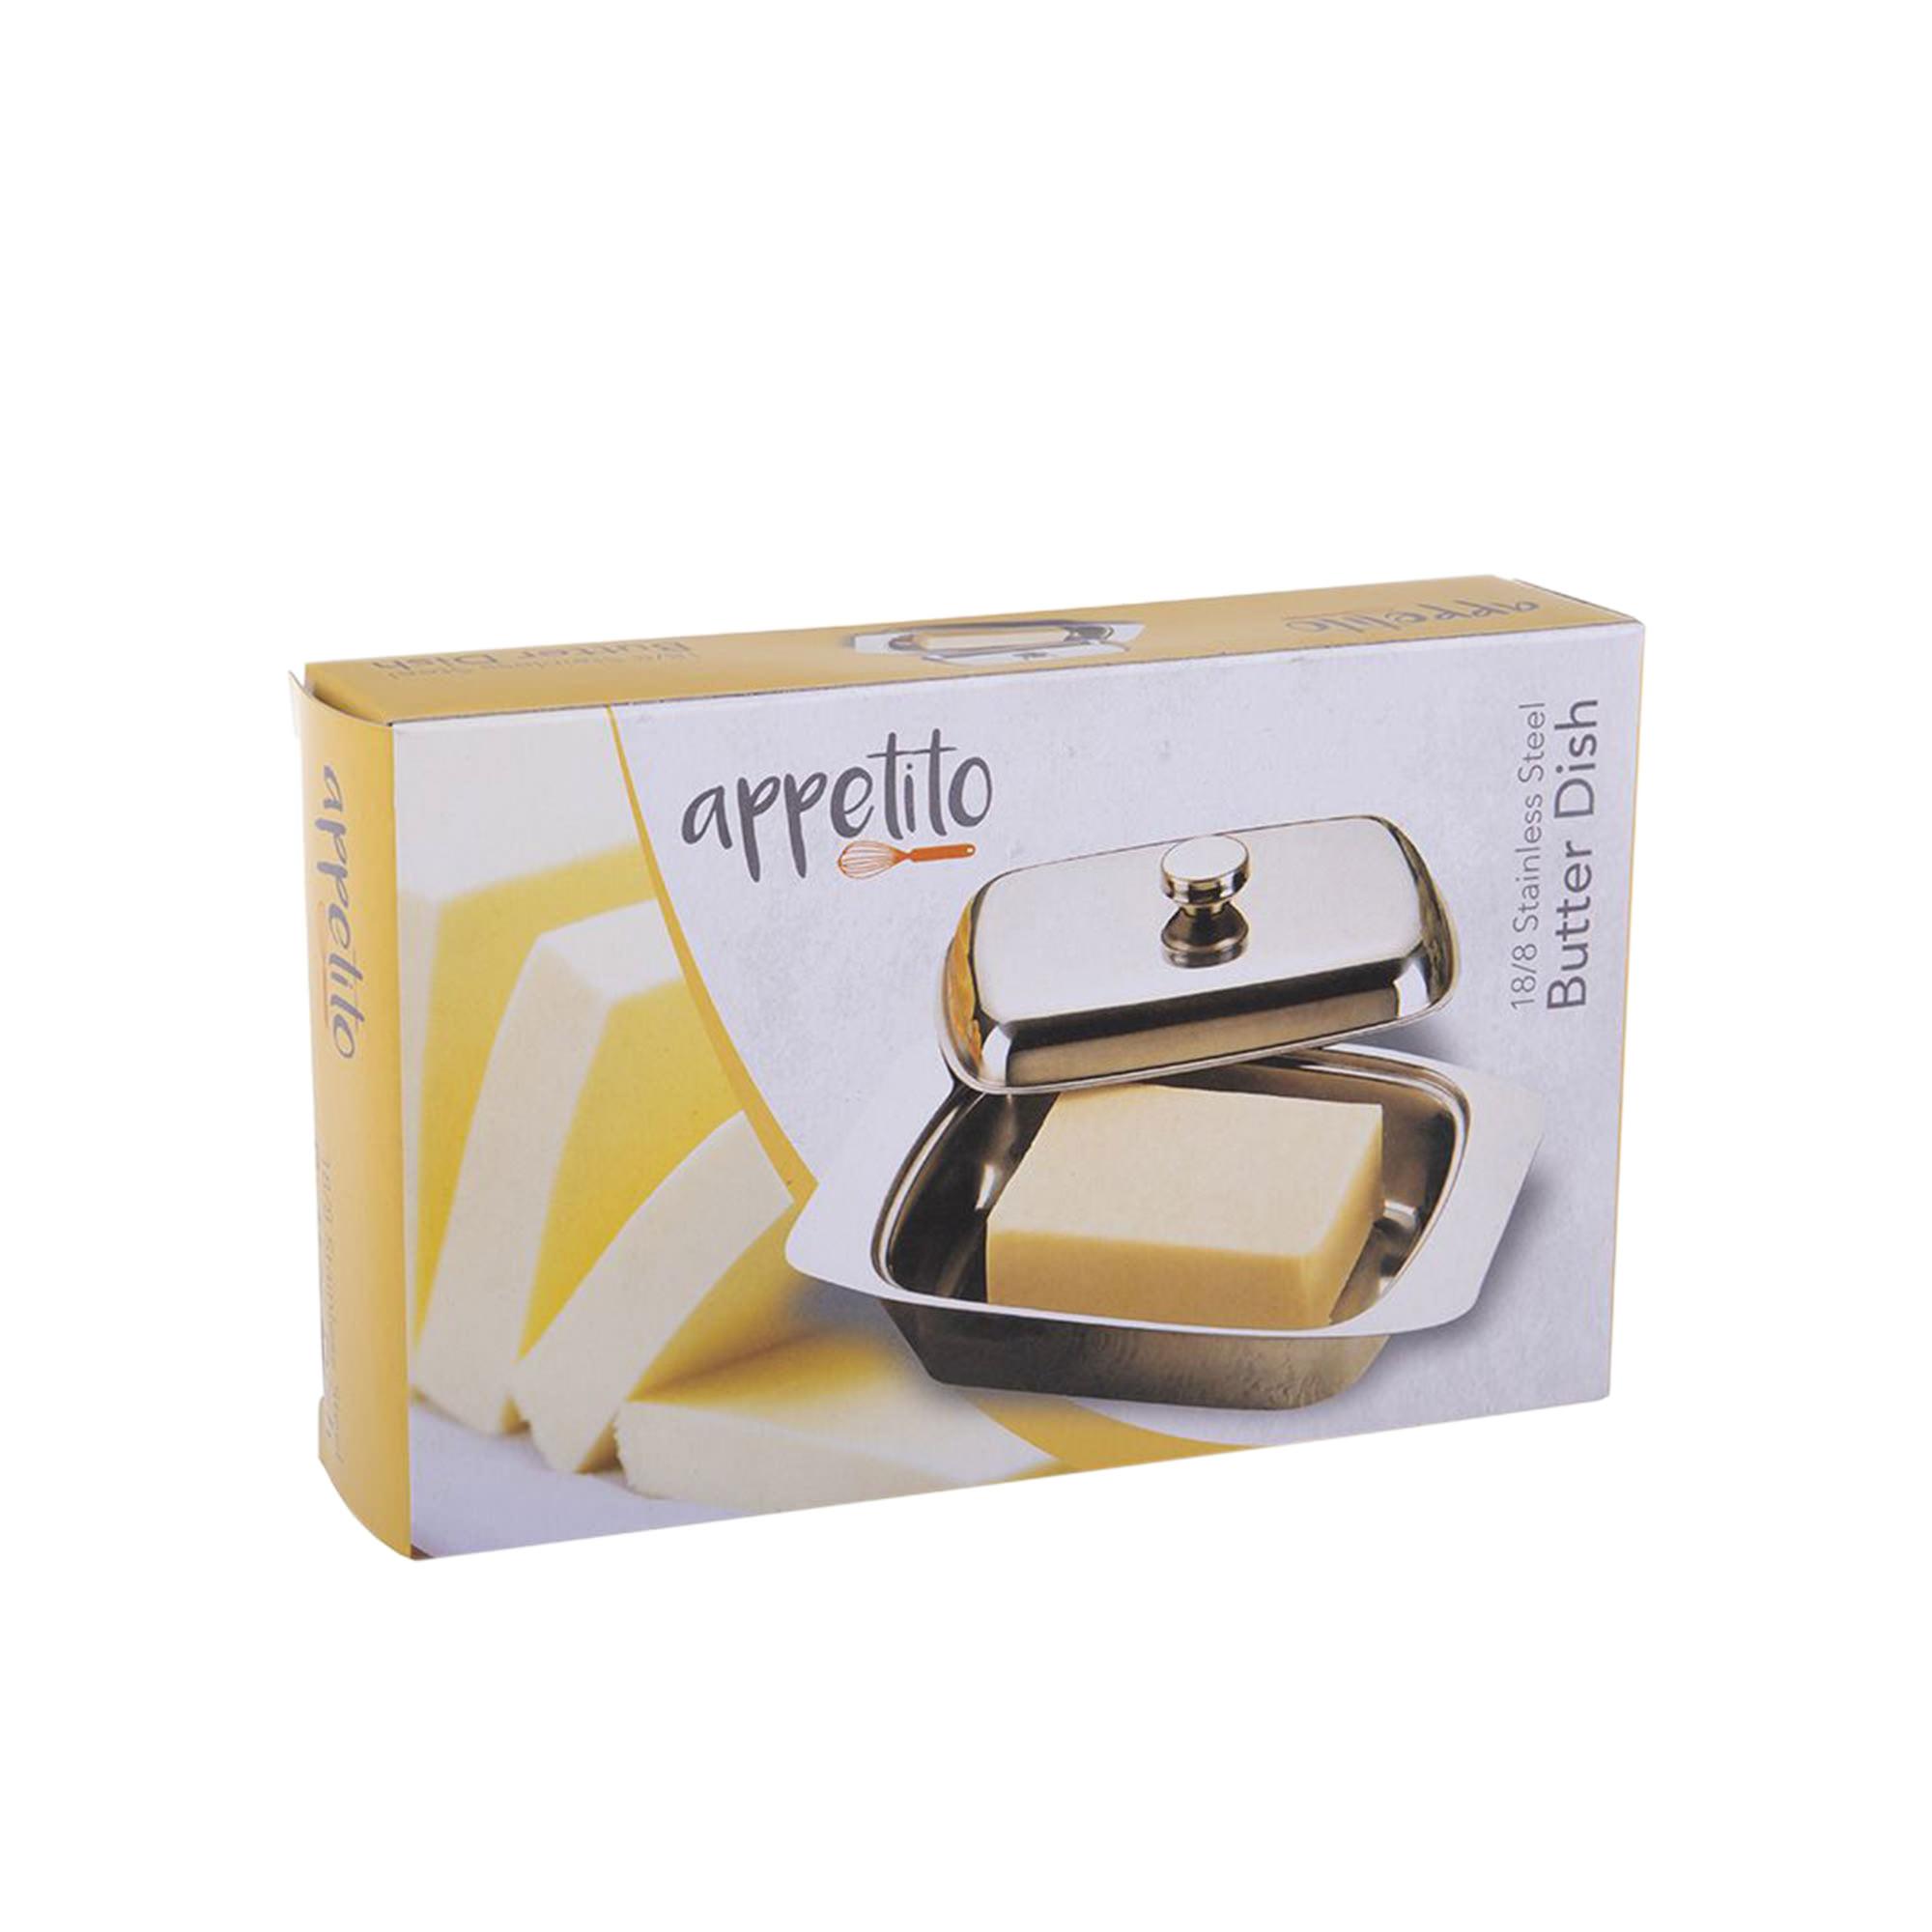 Appetito Stainless Steel Butter Dish with Cover Image 3